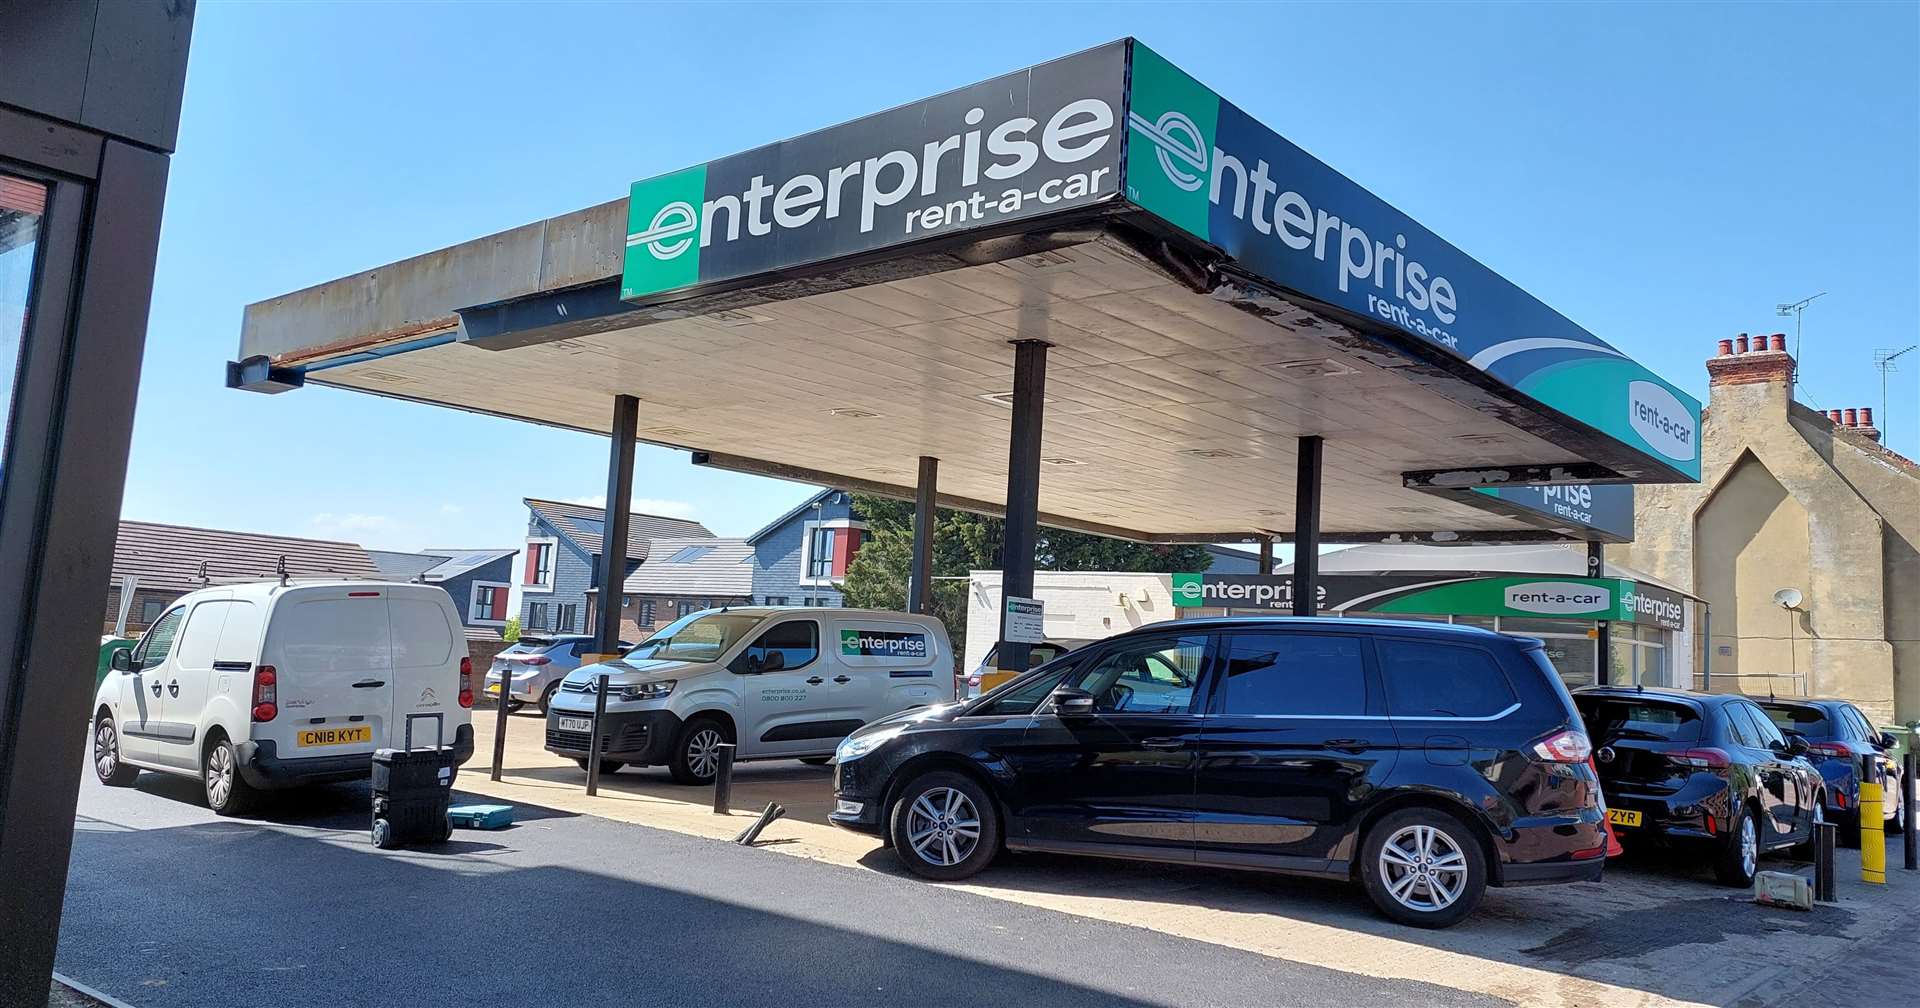 The former petrol station canopy at Enterprise Rent-A-Car in Godinton Road will be demolished